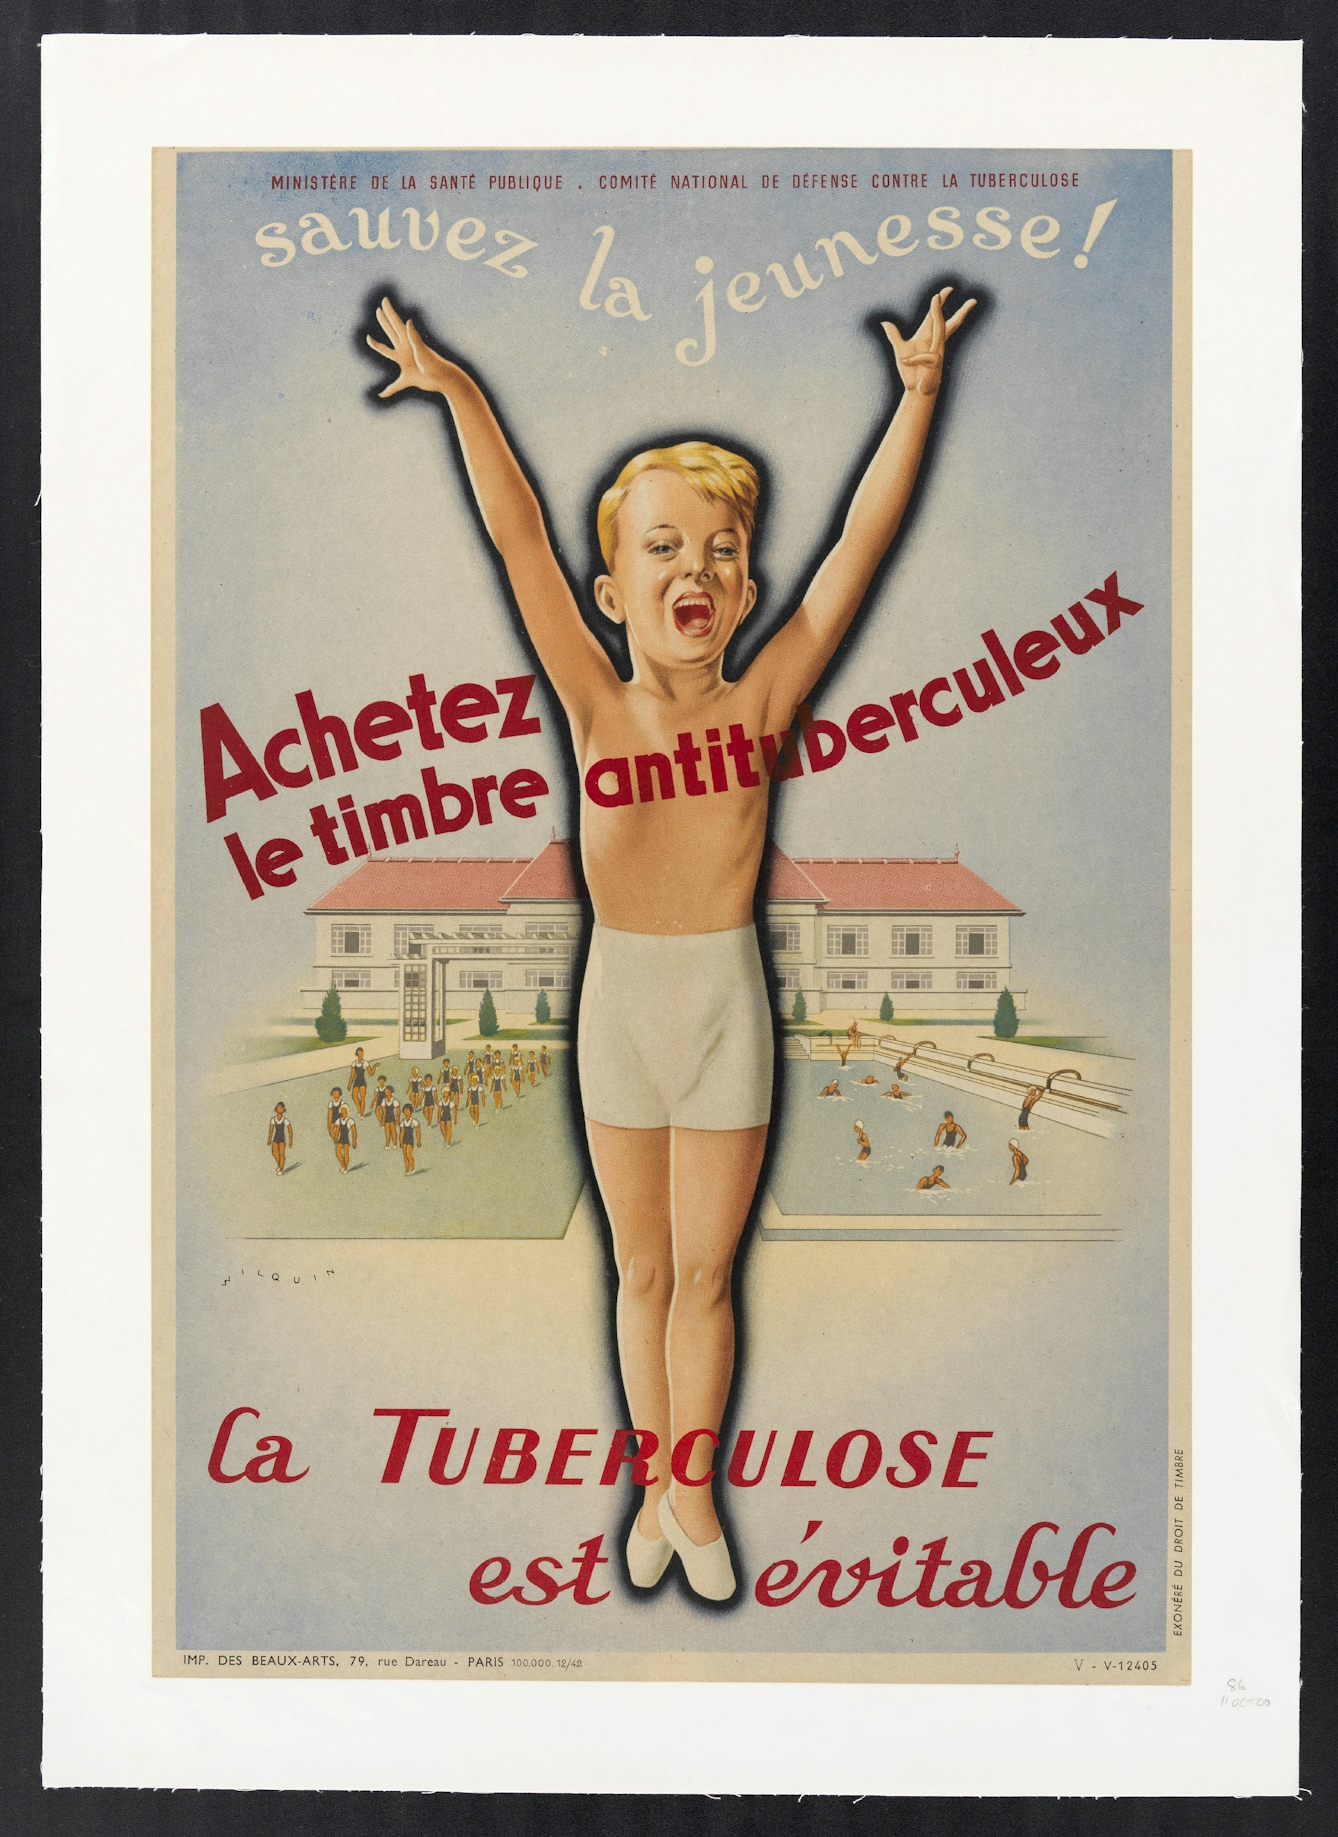 A colour public health poster showing a young boy in gym shorts and shoes standing and laughing in a gymnastic pose with his hands raised. Behind him is a large building infront of which are young people in uniforms doing exercises on the lawn on the left and on the right a swimming pool with young people swimming and bathing. The lettering in French says "Sauvez la jeunesse! Achetez le timbre antituberculeux. Ca TUBERCULOSE es evitable."